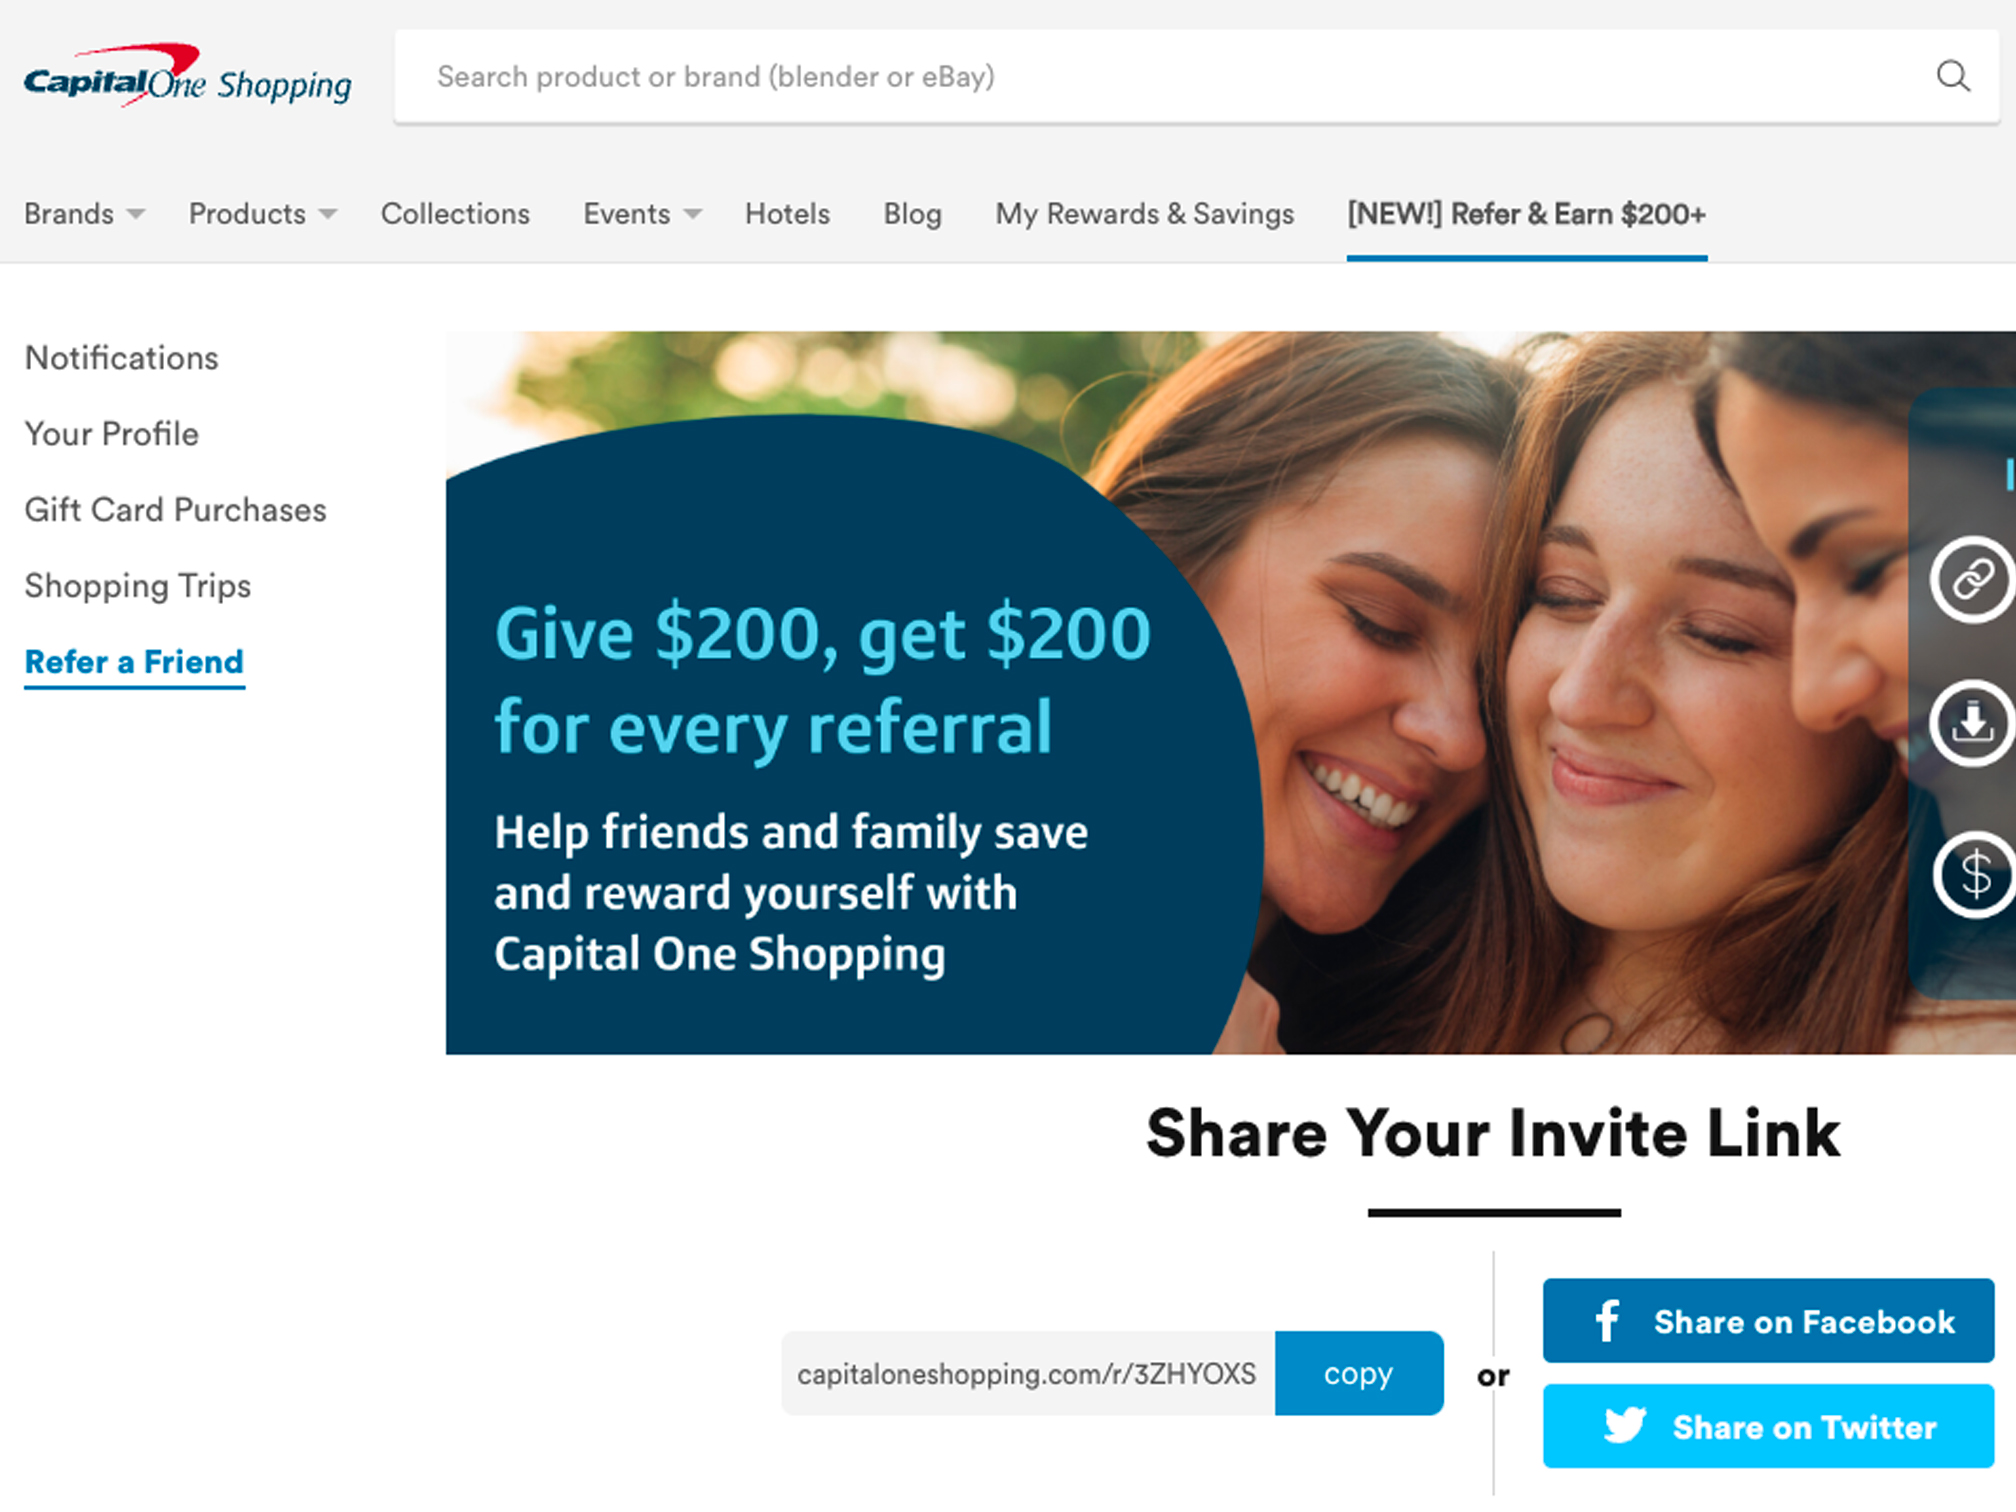 Limited time $200 offer for Capital One Shopping